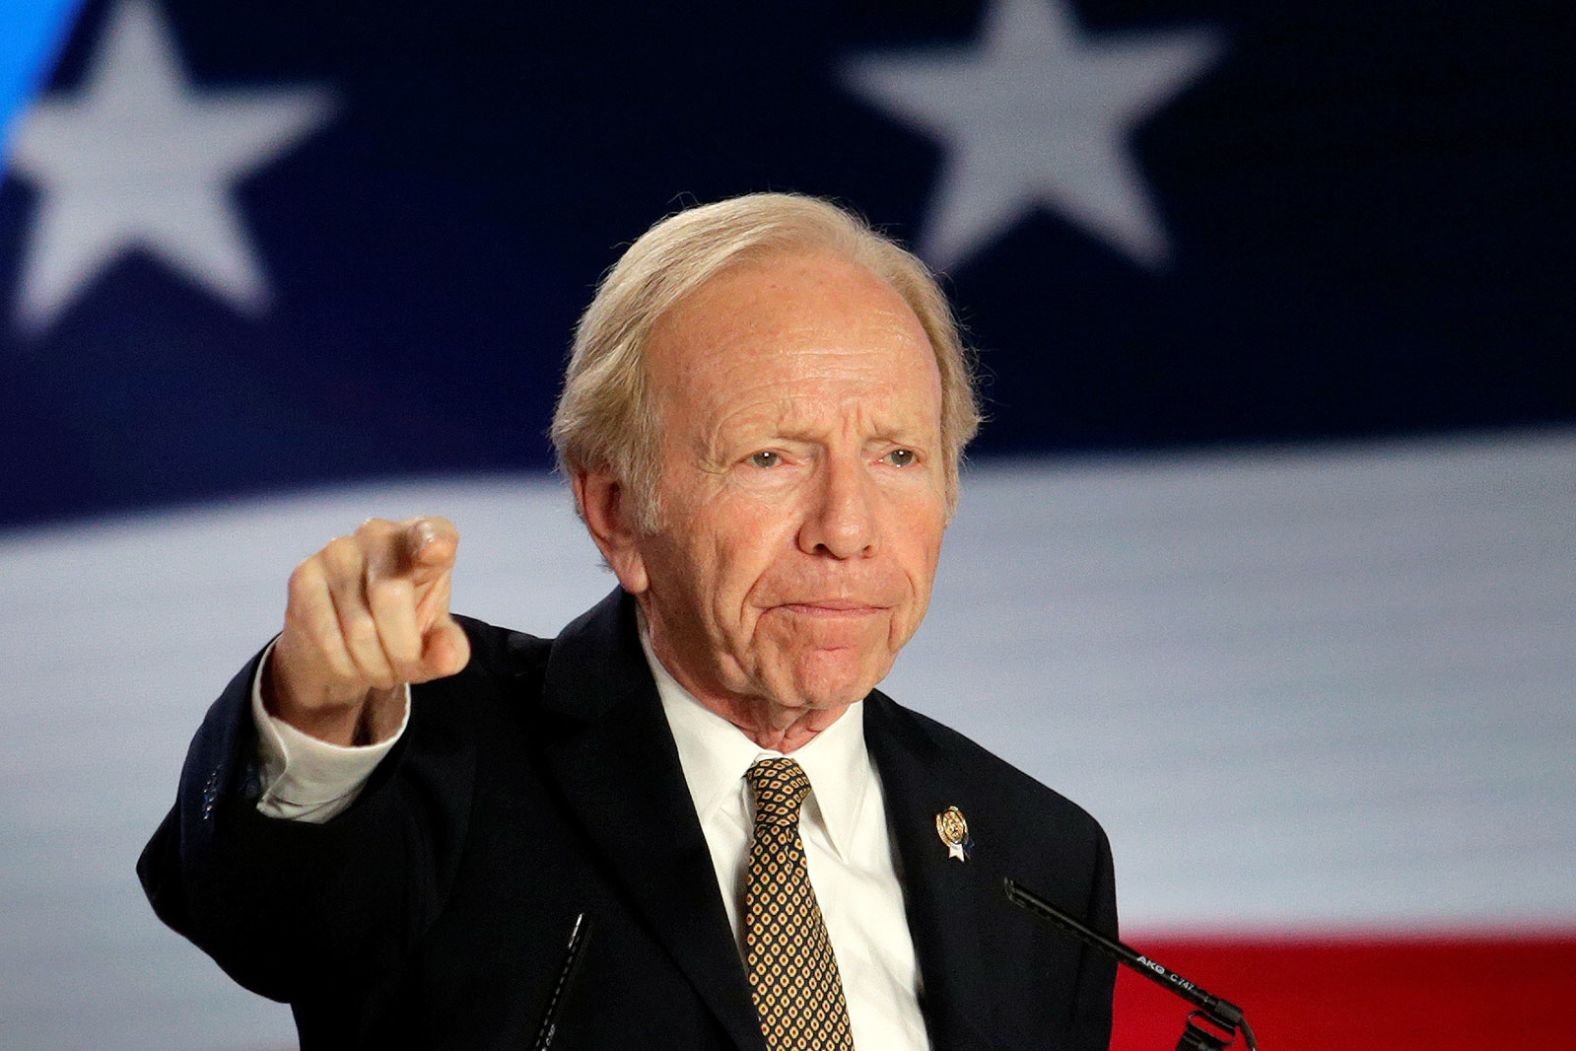 <a href="https://www.cnn.com/2024/03/27/politics/joe-lieberman/index.html" target="_blank">Joe Lieberman</a>, the first Jewish vice-presidential nominee of a major party, whose conscience and independent streak later led him on a journey away from his home in the Democratic Party, died Wednesday, March 27, according to a statement from his family. He was 82.